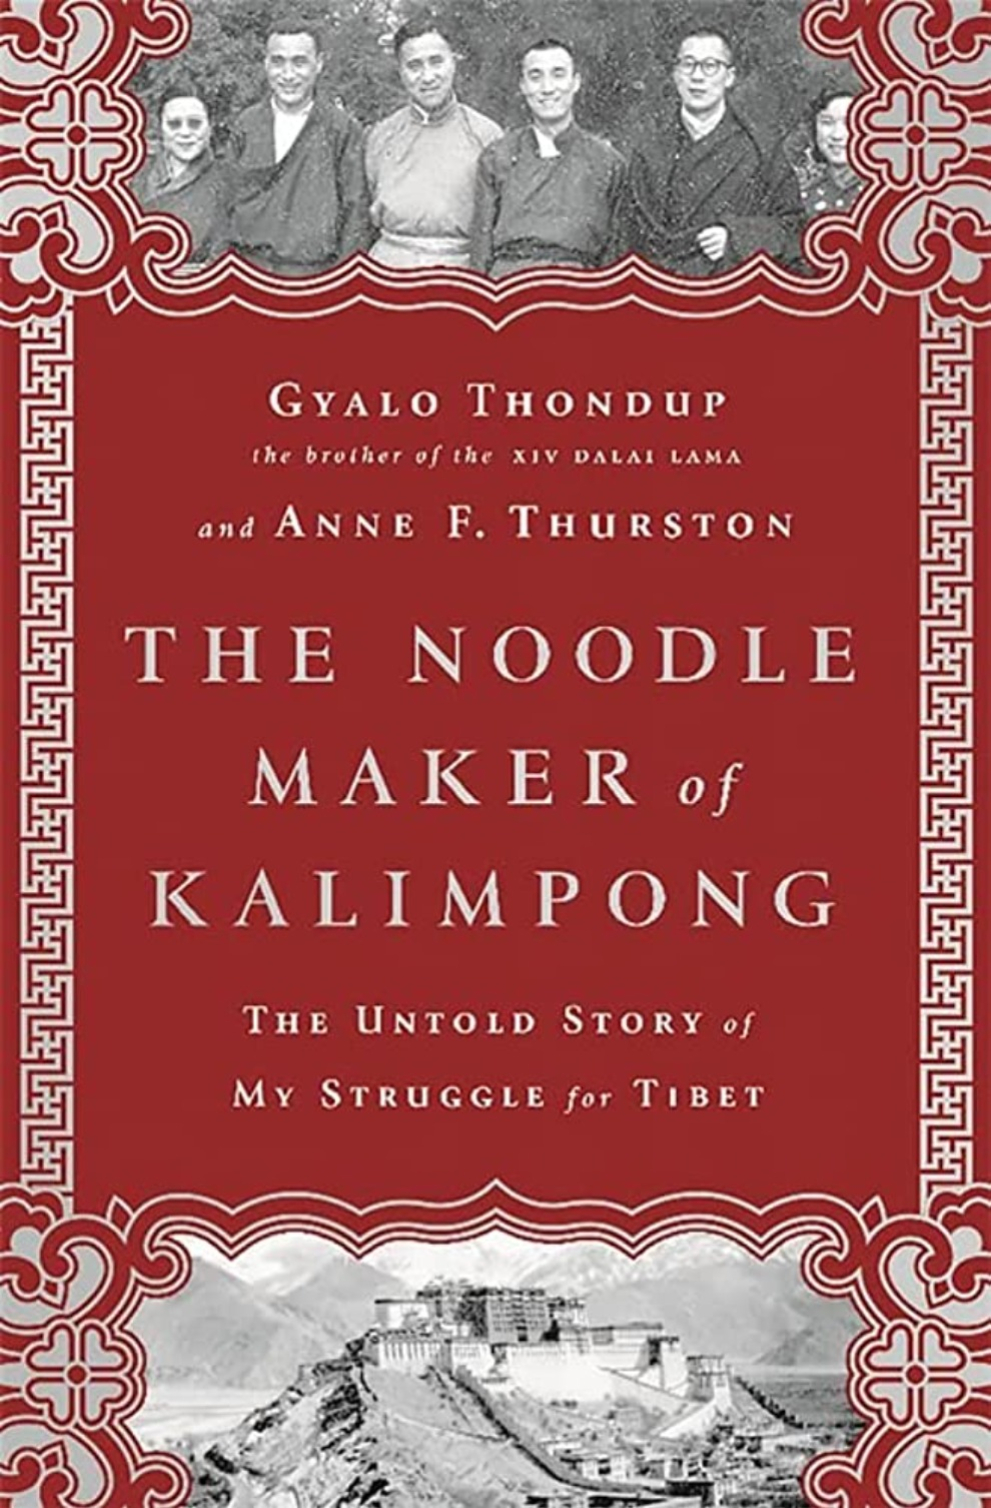 The Noodle Maker of Kalimpong by Gyalo Thondup and Anne Thurston